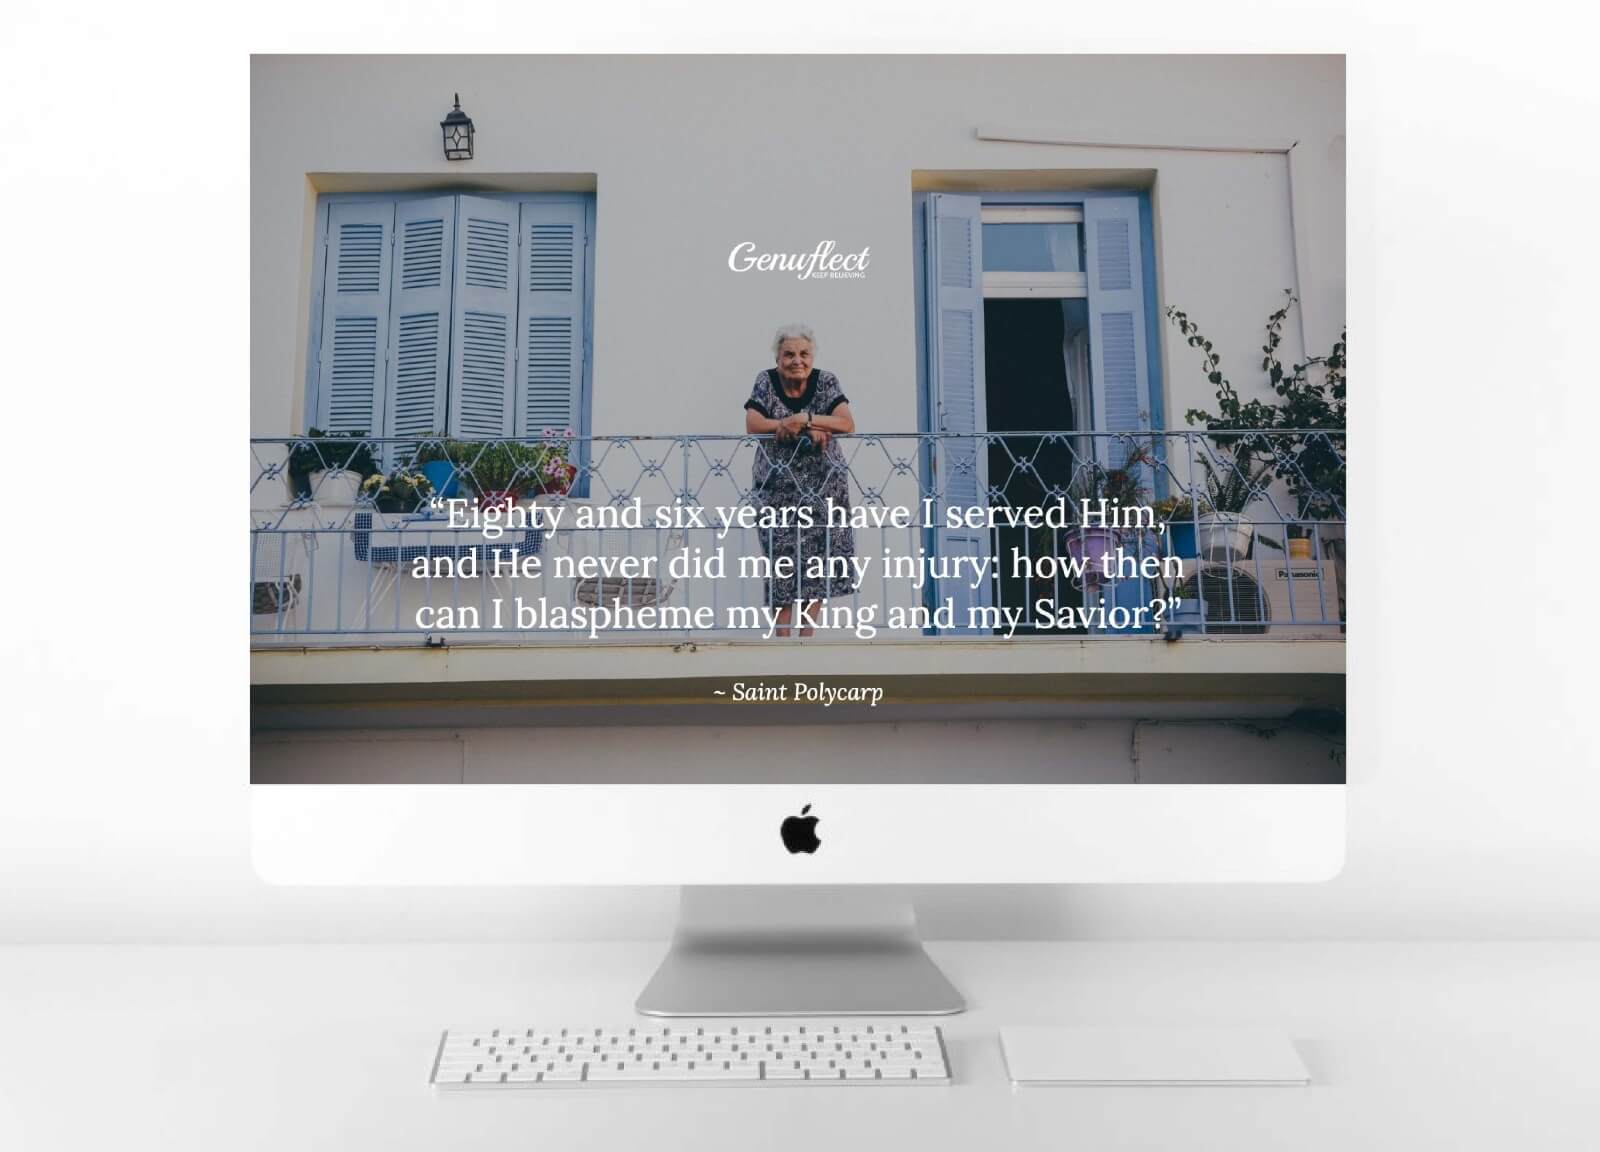 Genuflect computer background image of a Elderly woman standing outside on her balcony leaning on the railing and smiling